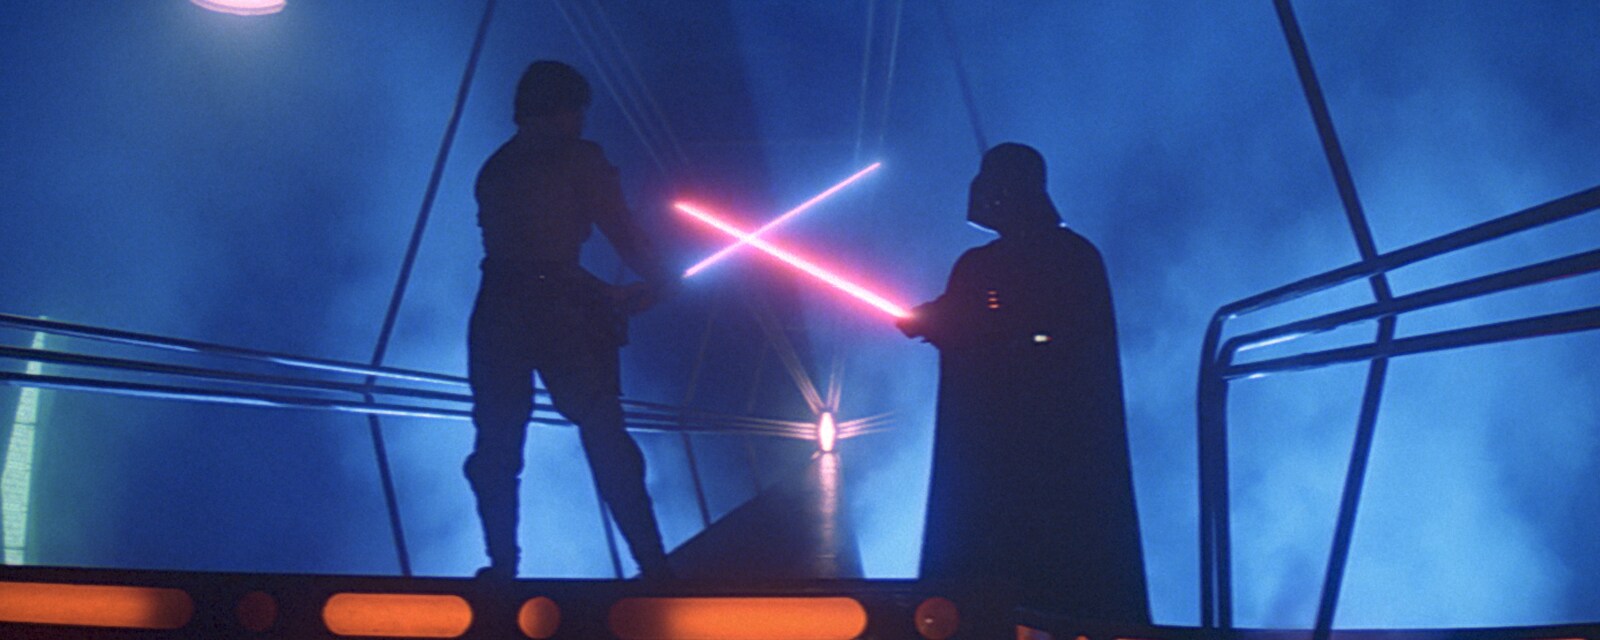 Luke and Darth Vader duel in Cloud City